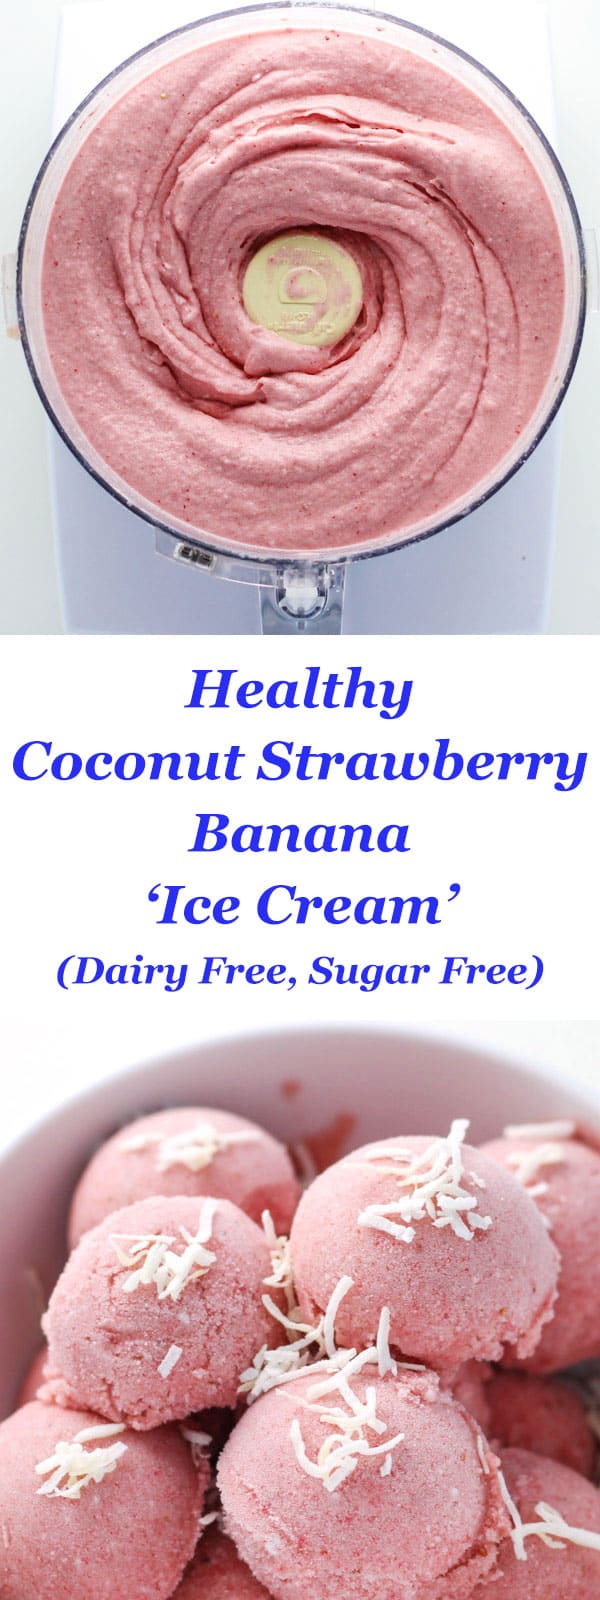 Healthy Coconut Strawberry Banana "Ice Cream" made Dairy Free! This is so smooth, creamy, and delicious!